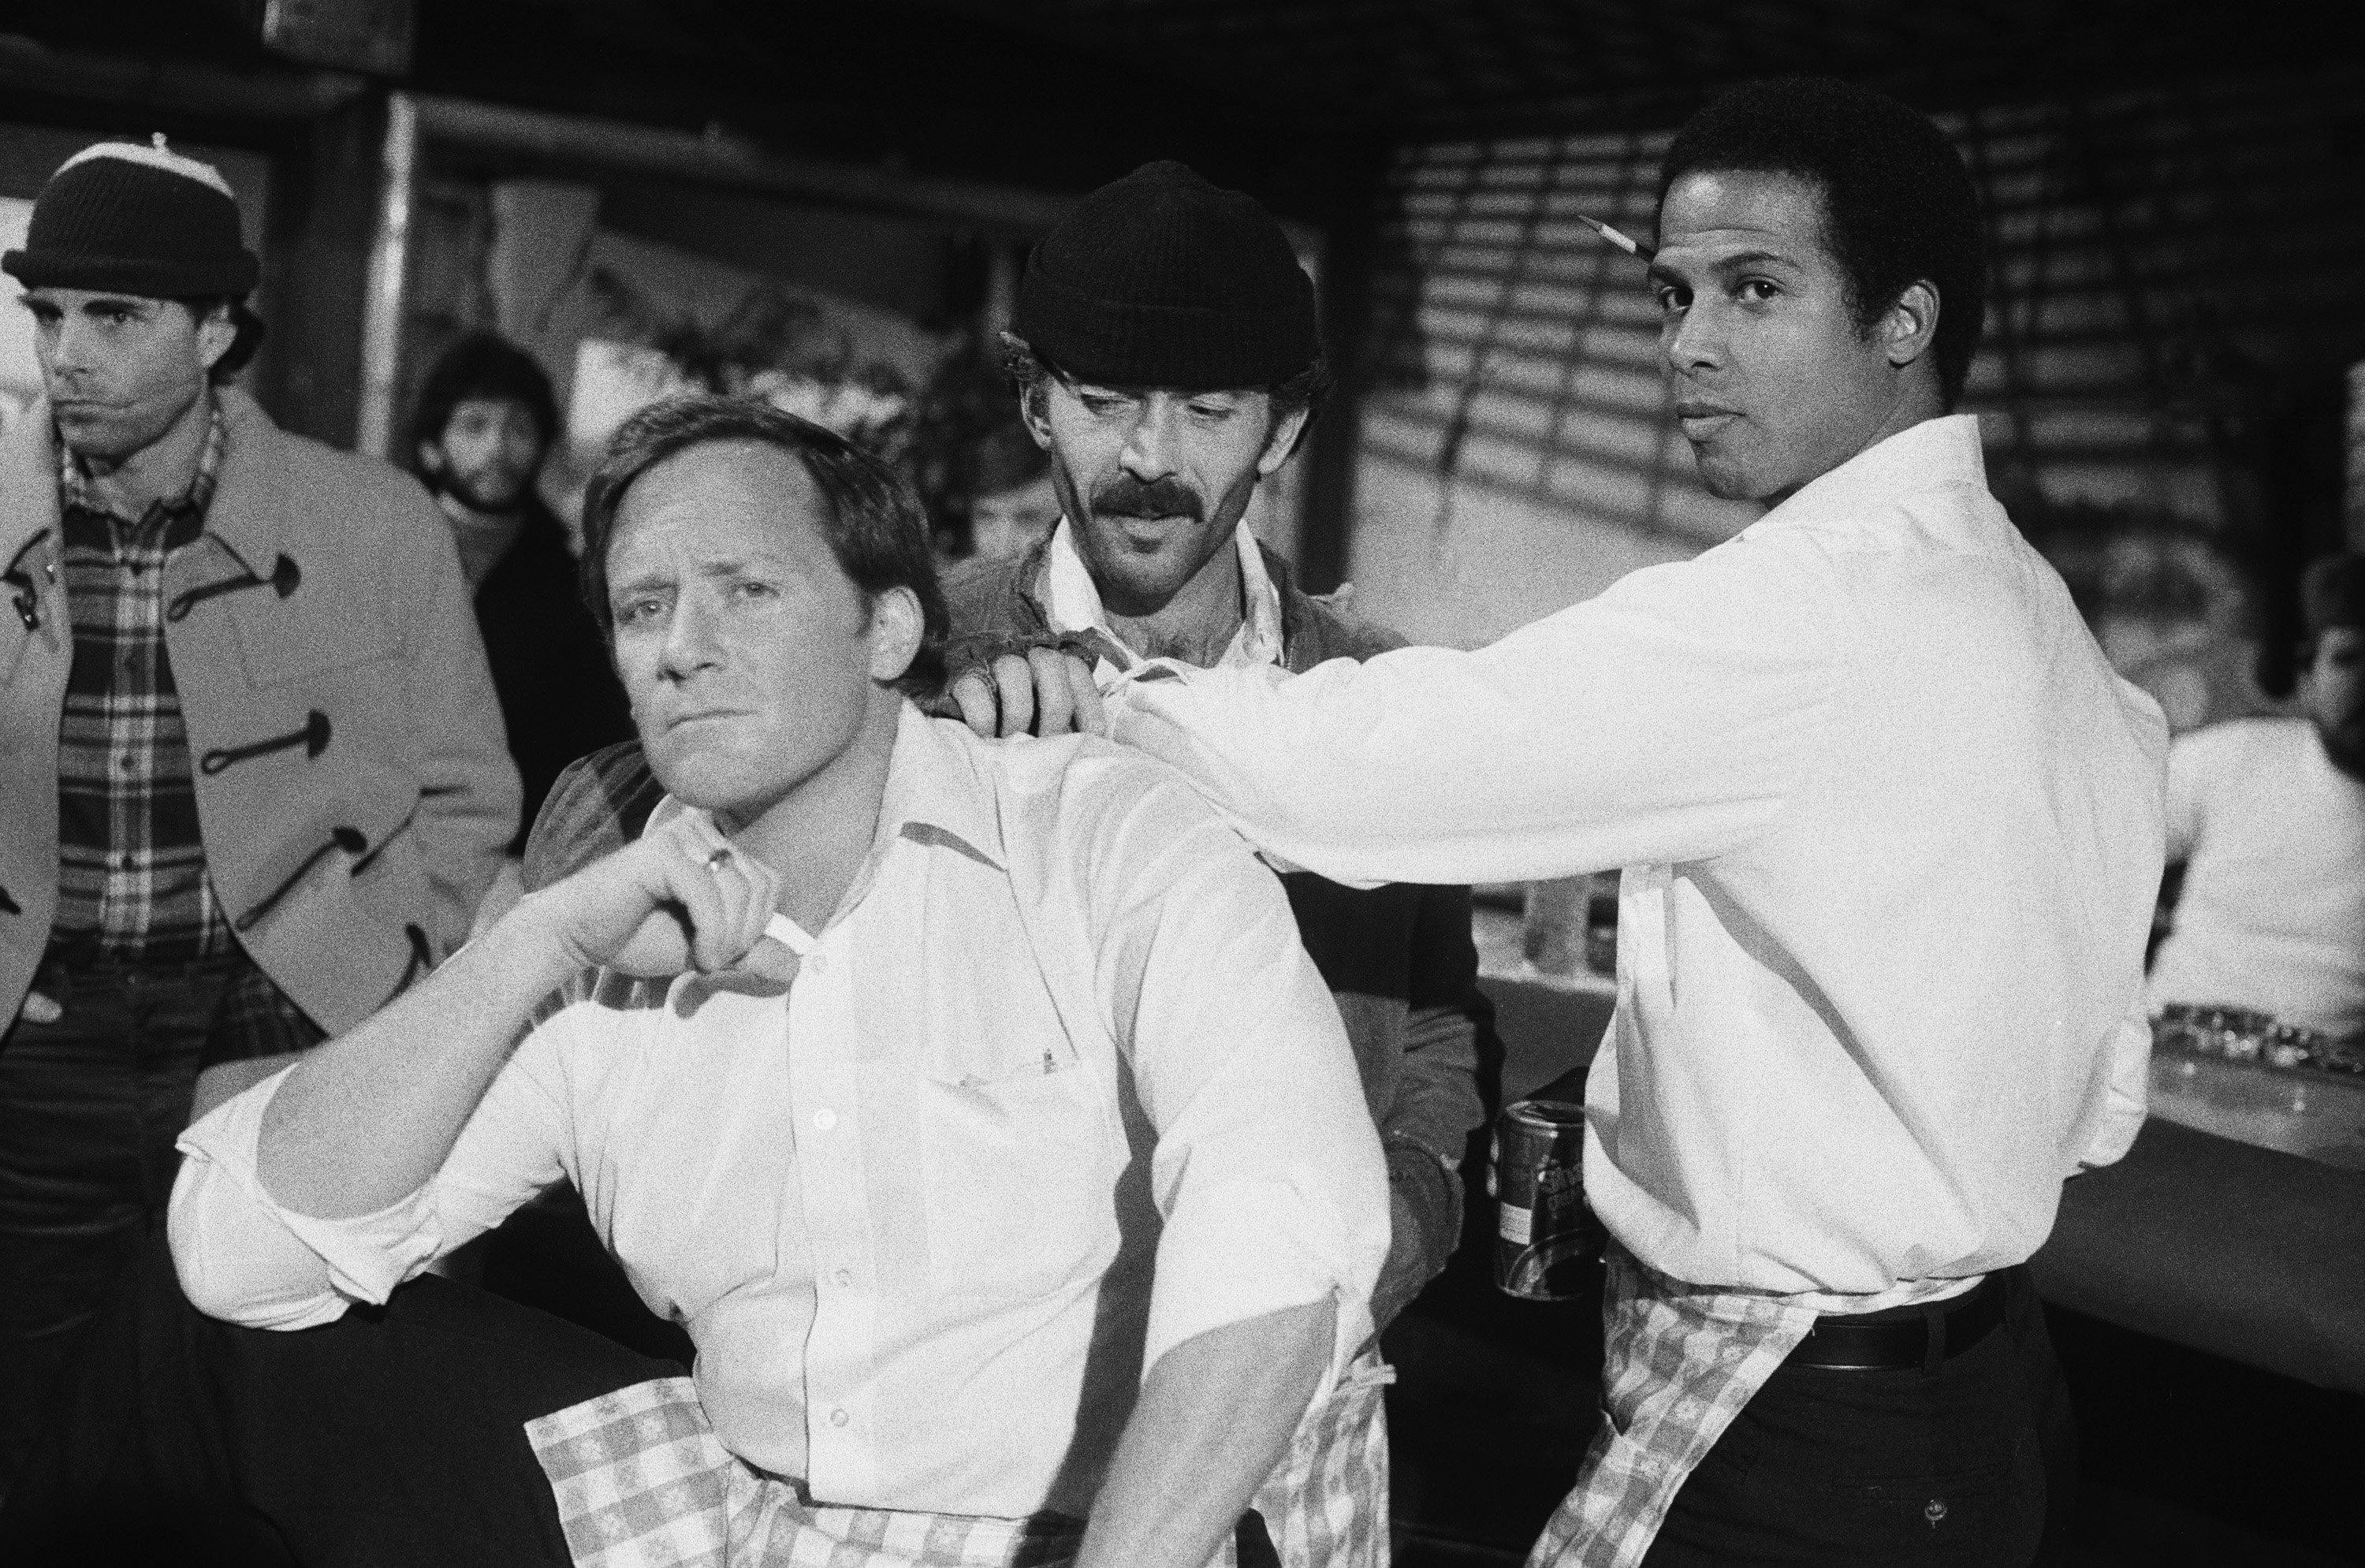 Charles Haid as Officer Andy Renko, Bruce Weitz as Det. Mick Belker, Michael Warren as Officer Bobby Hill in "Hill Street Blues."  | Source: Getty Images